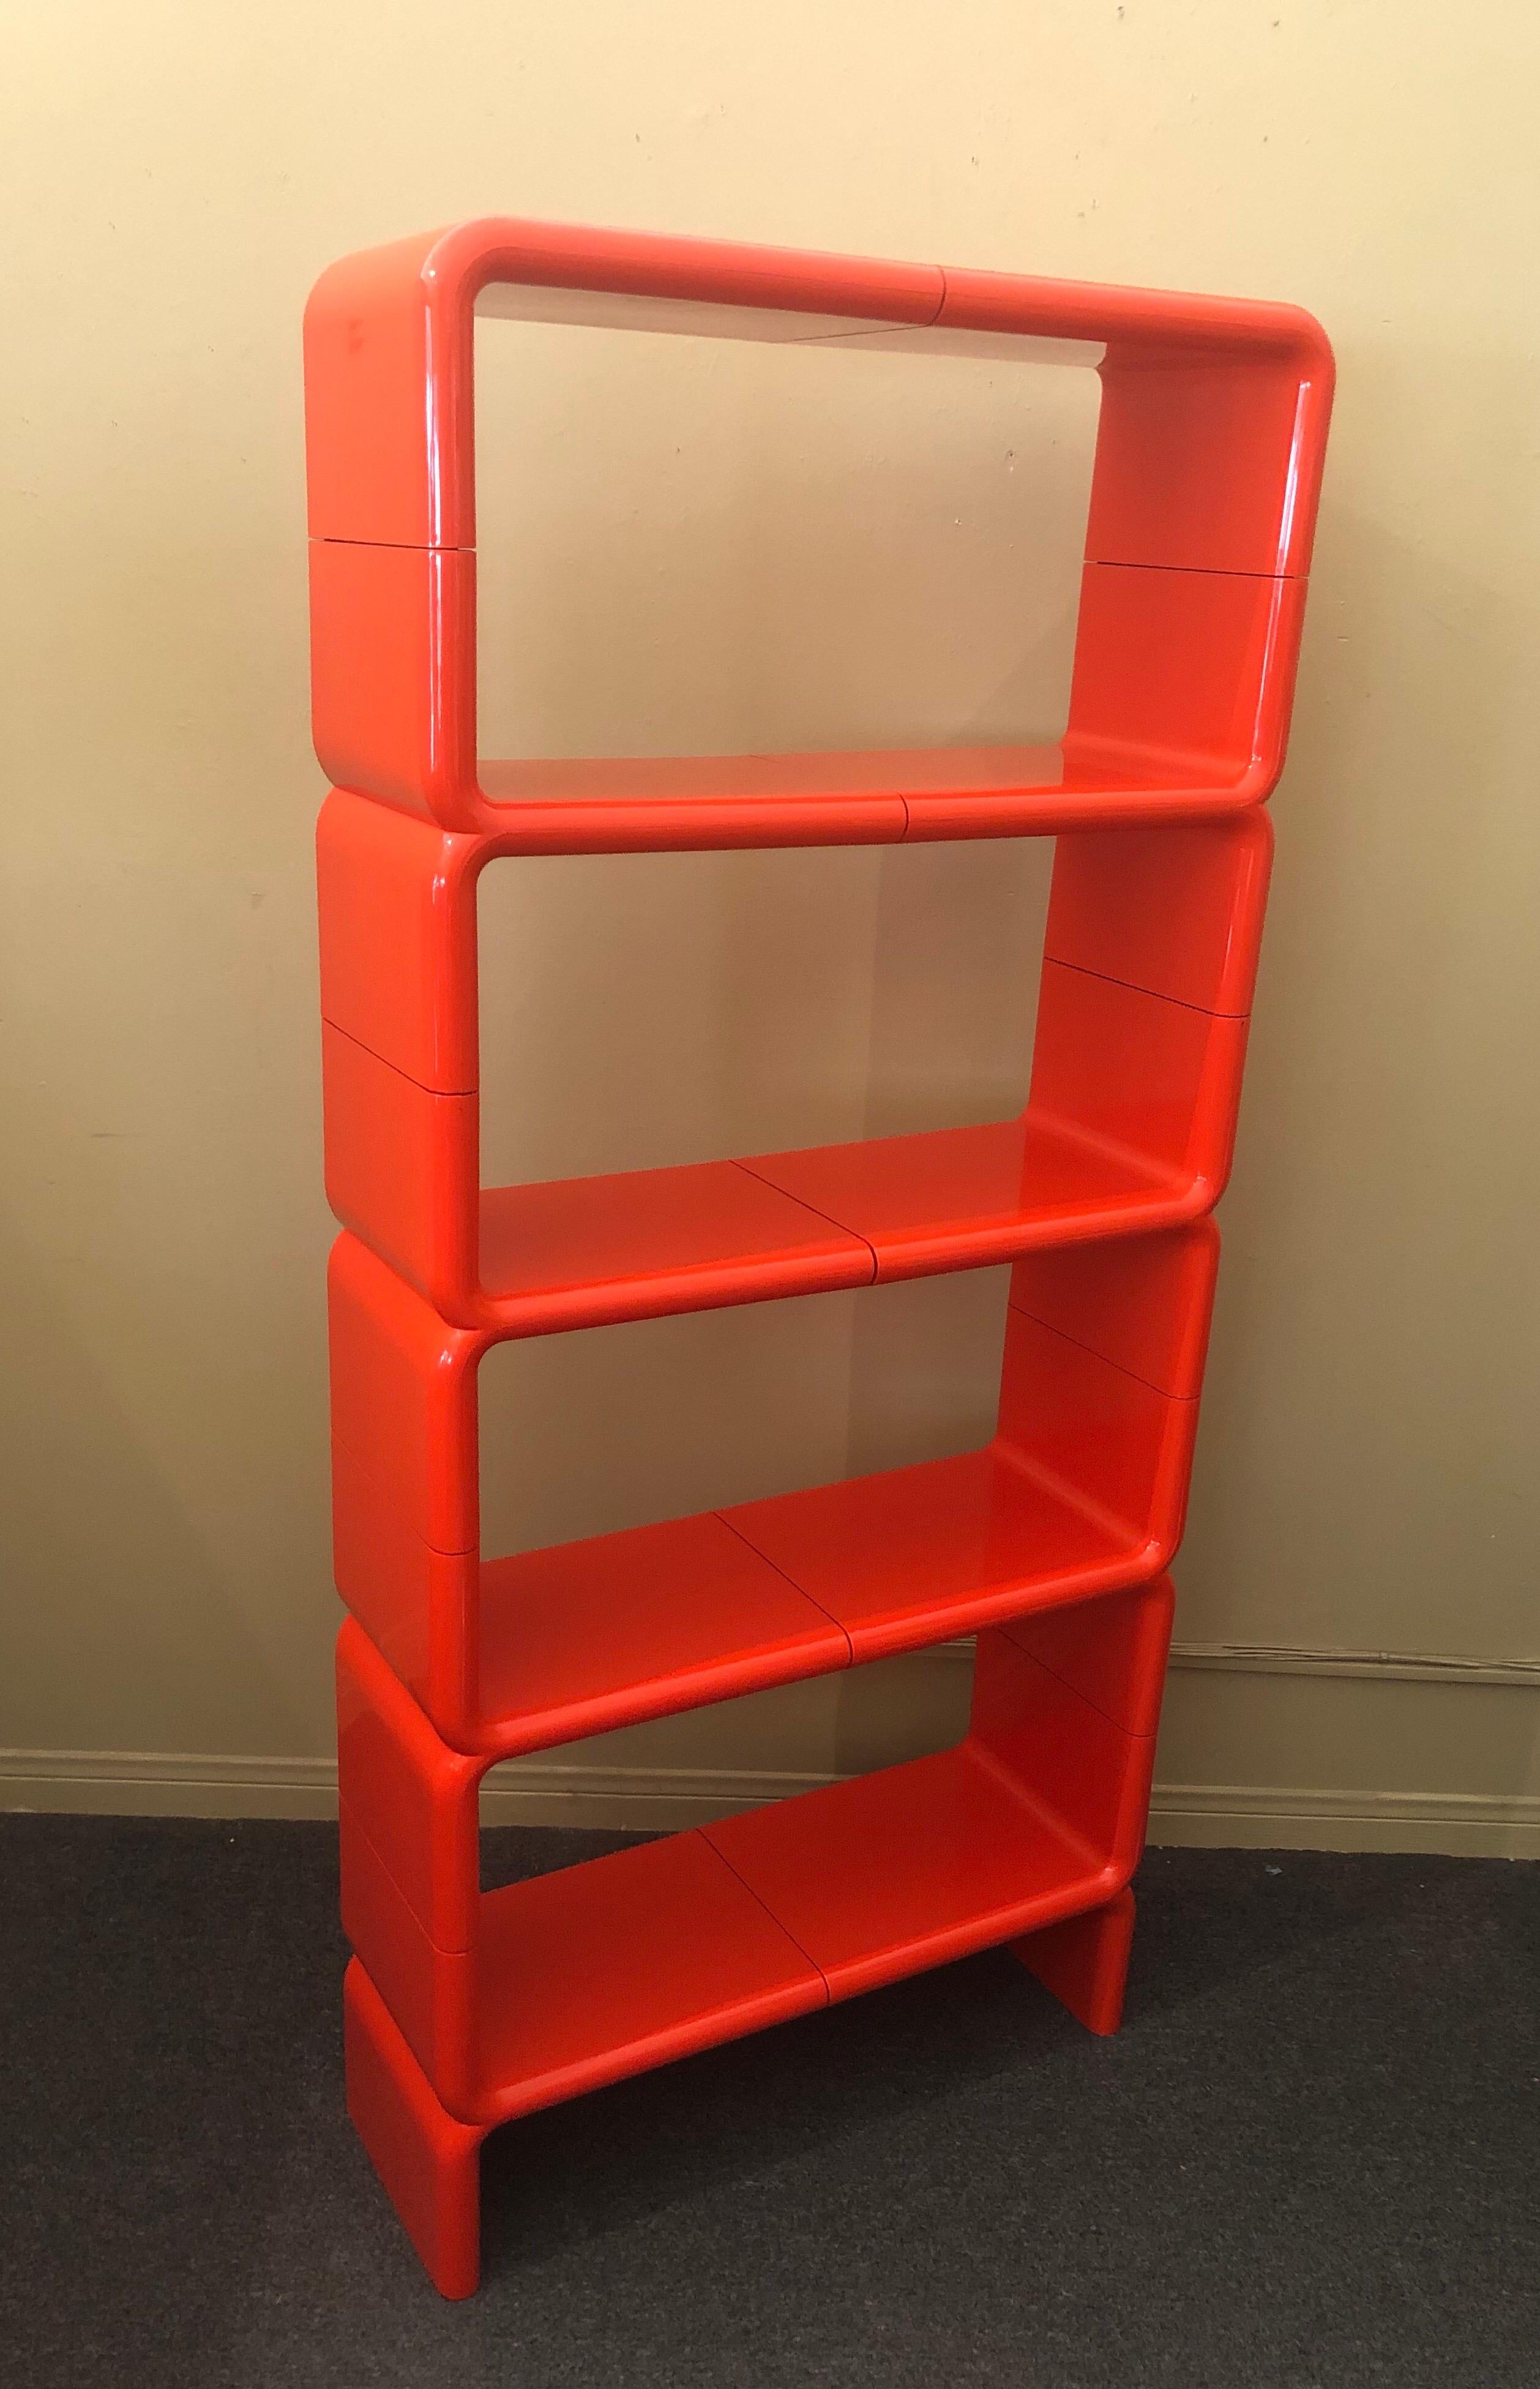 Super cool MCM orange, plastic, backless modular shelving system / bookcase by Kay Leroy Ruggles for Directional Furniture, circa 1970s. This Space Age 10 piece system, known as 